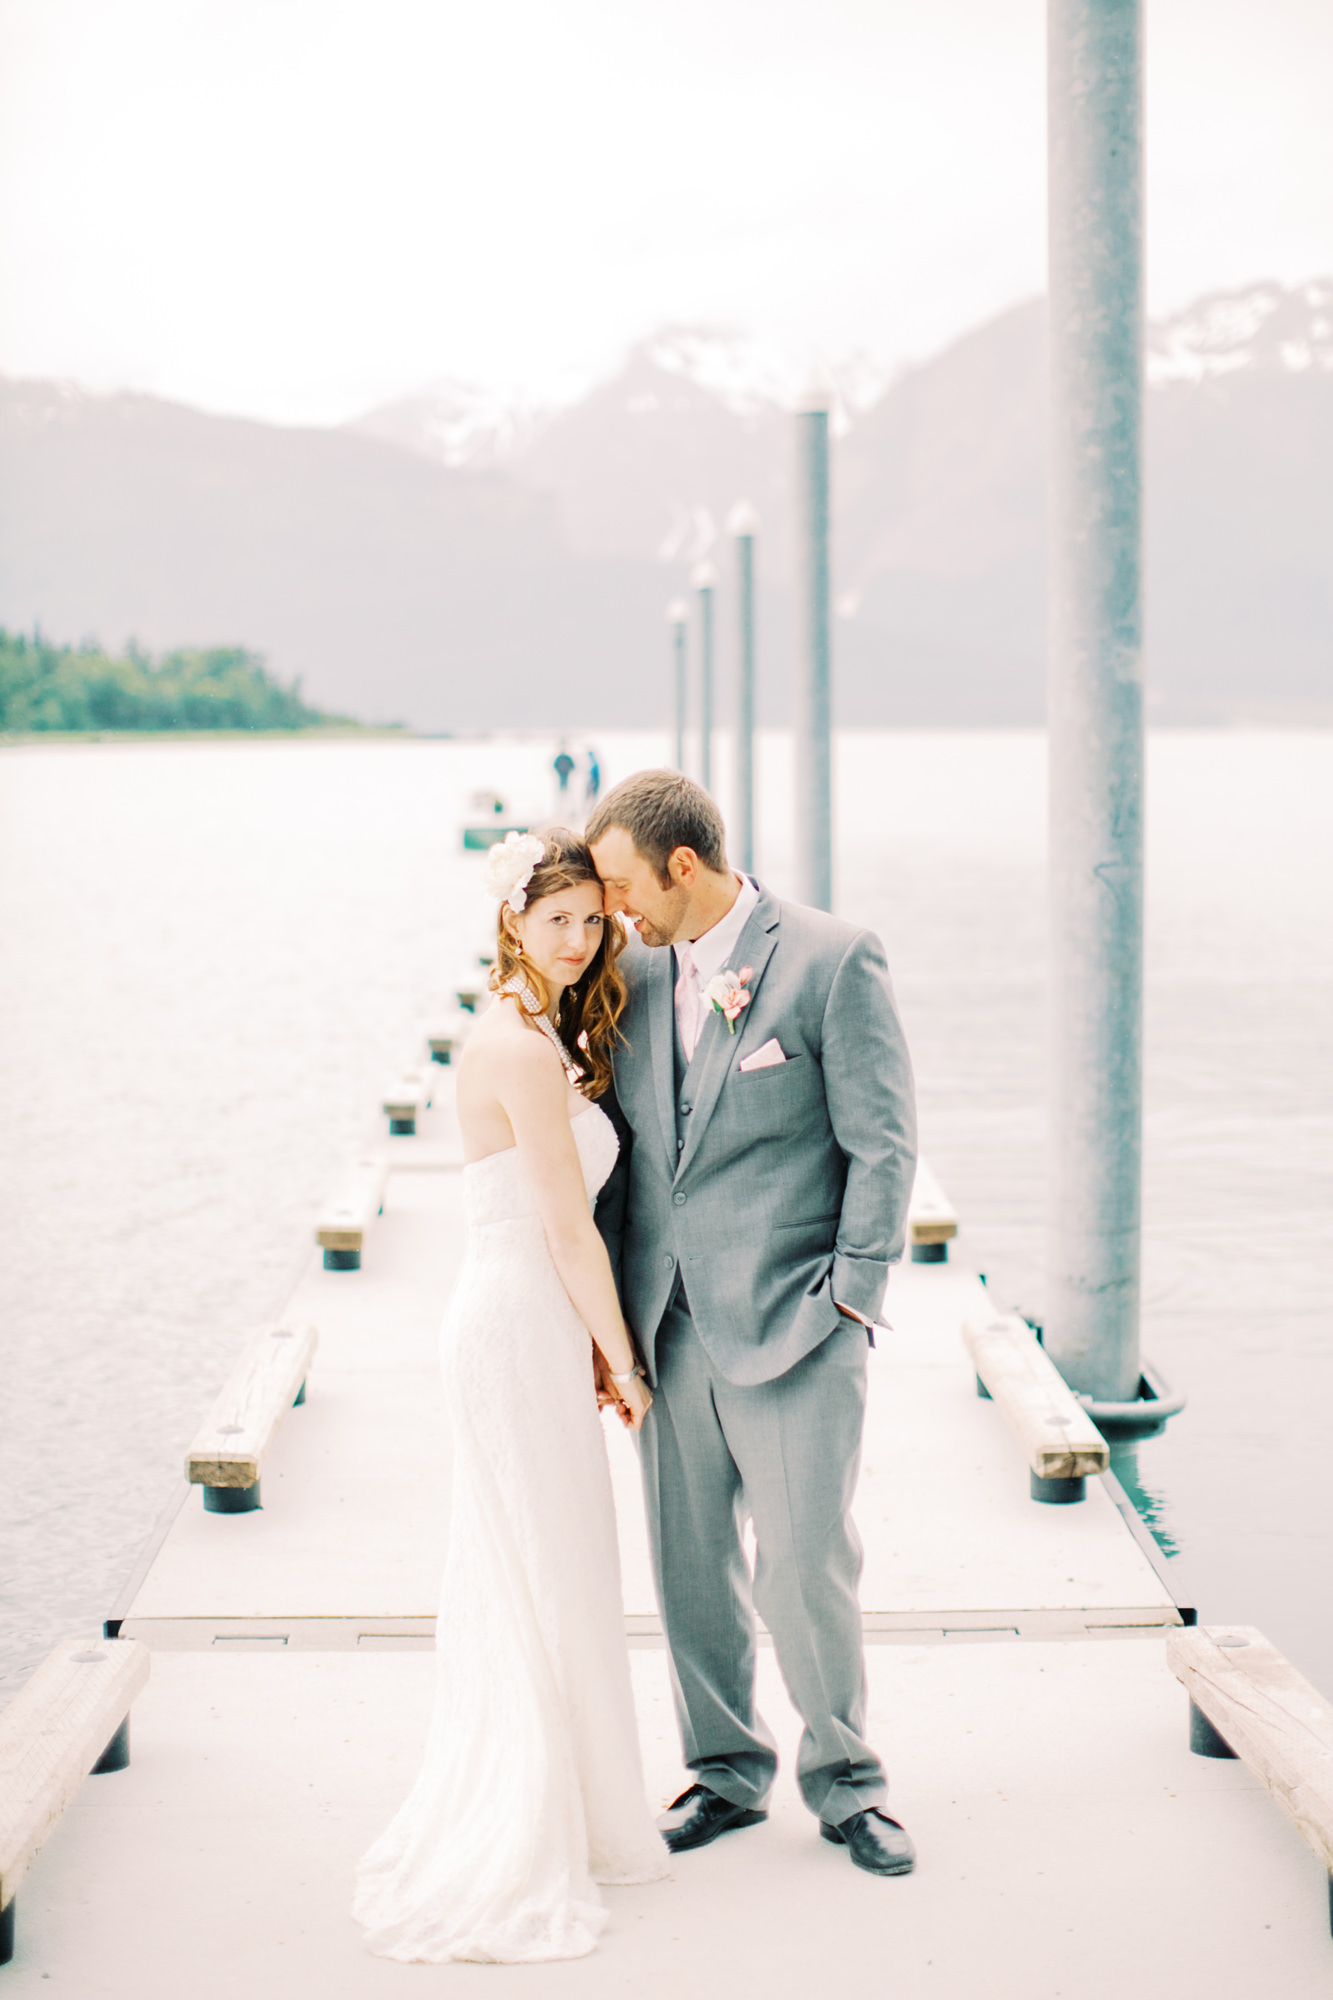 Genny and Harry pose for their wedding portraits in Haines, Alaska